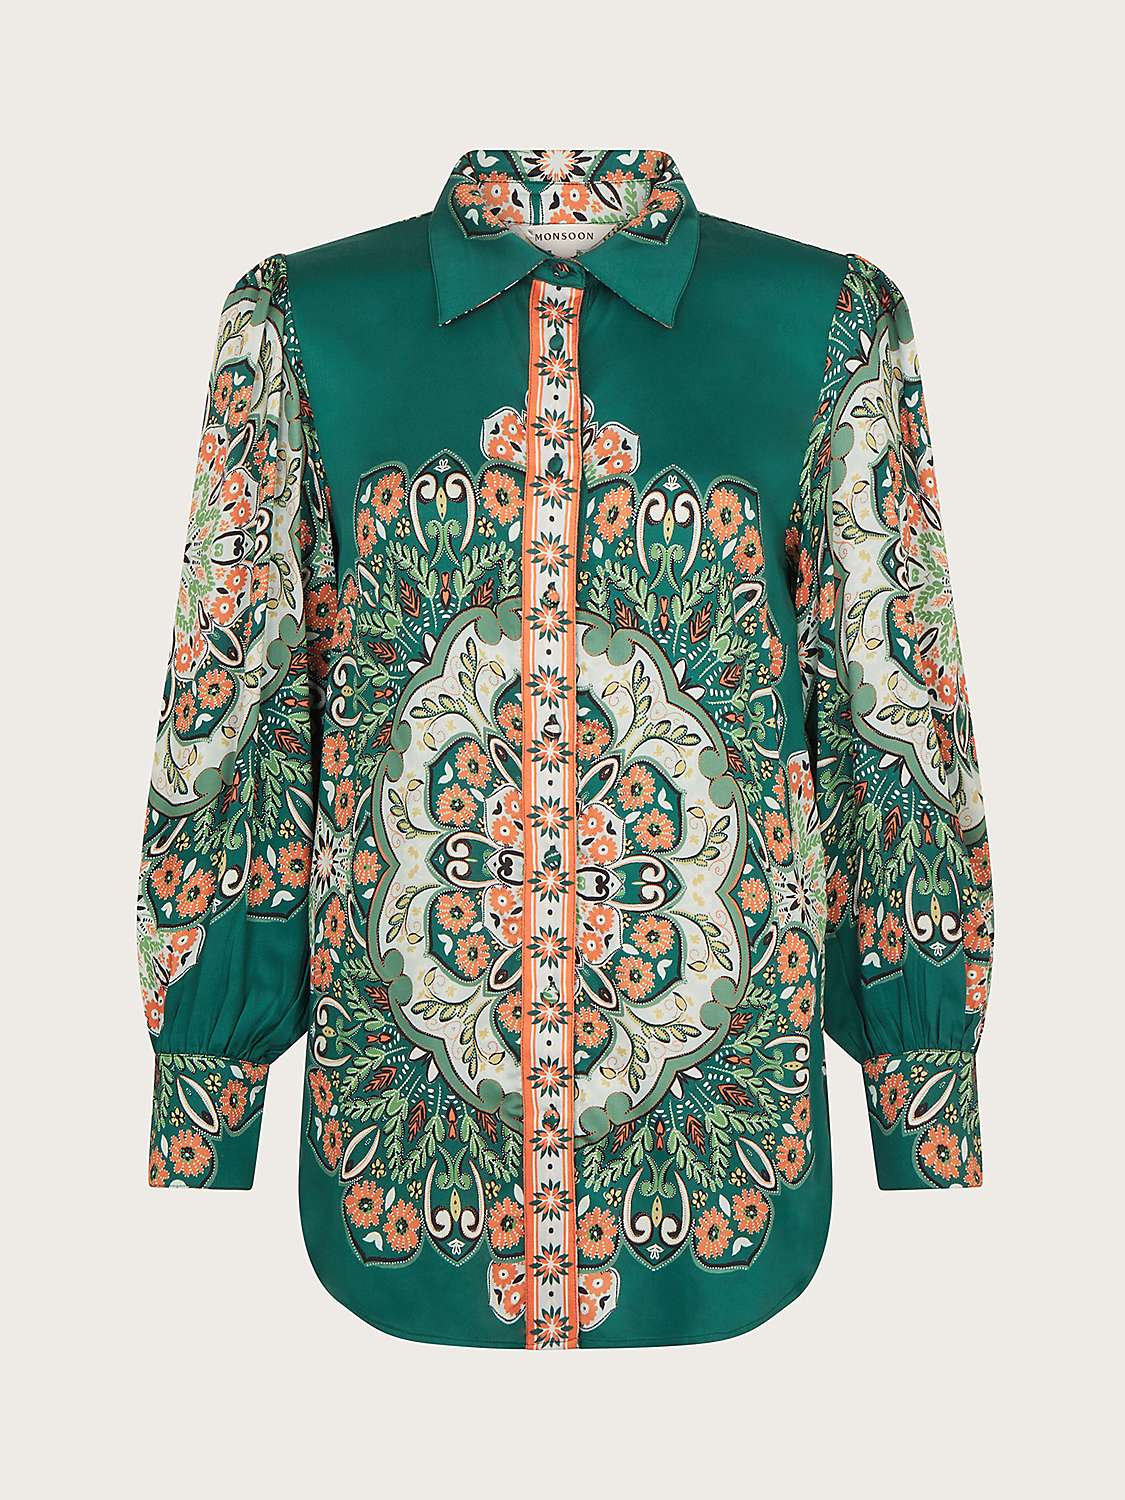 Buy Monsoon Lumi Abstract Print Blouse, Green/Multi Online at johnlewis.com